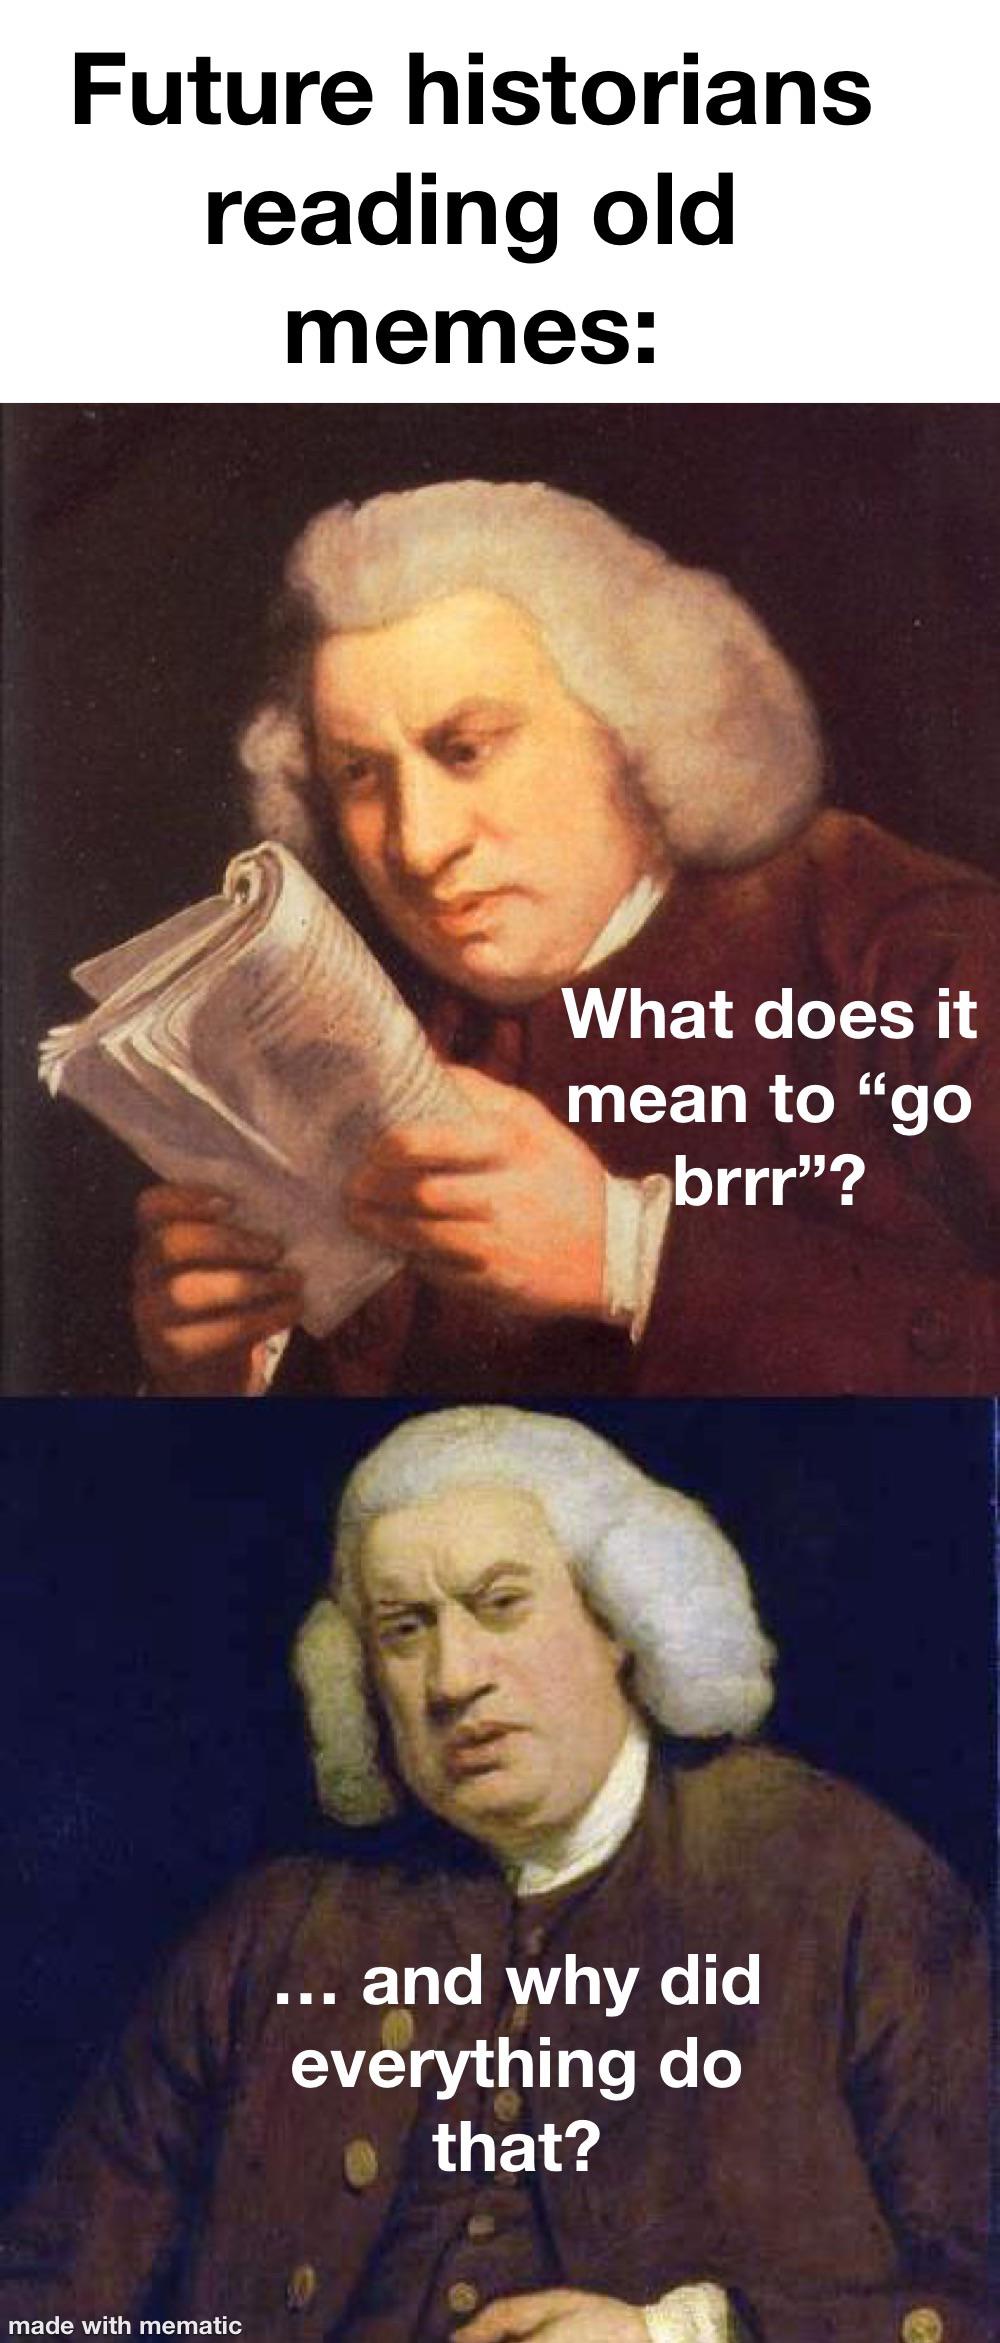 am i reading meme template - Future historians reading old memes What does it mean to "go brrr"? Iii and why did everything do that? made with mematic